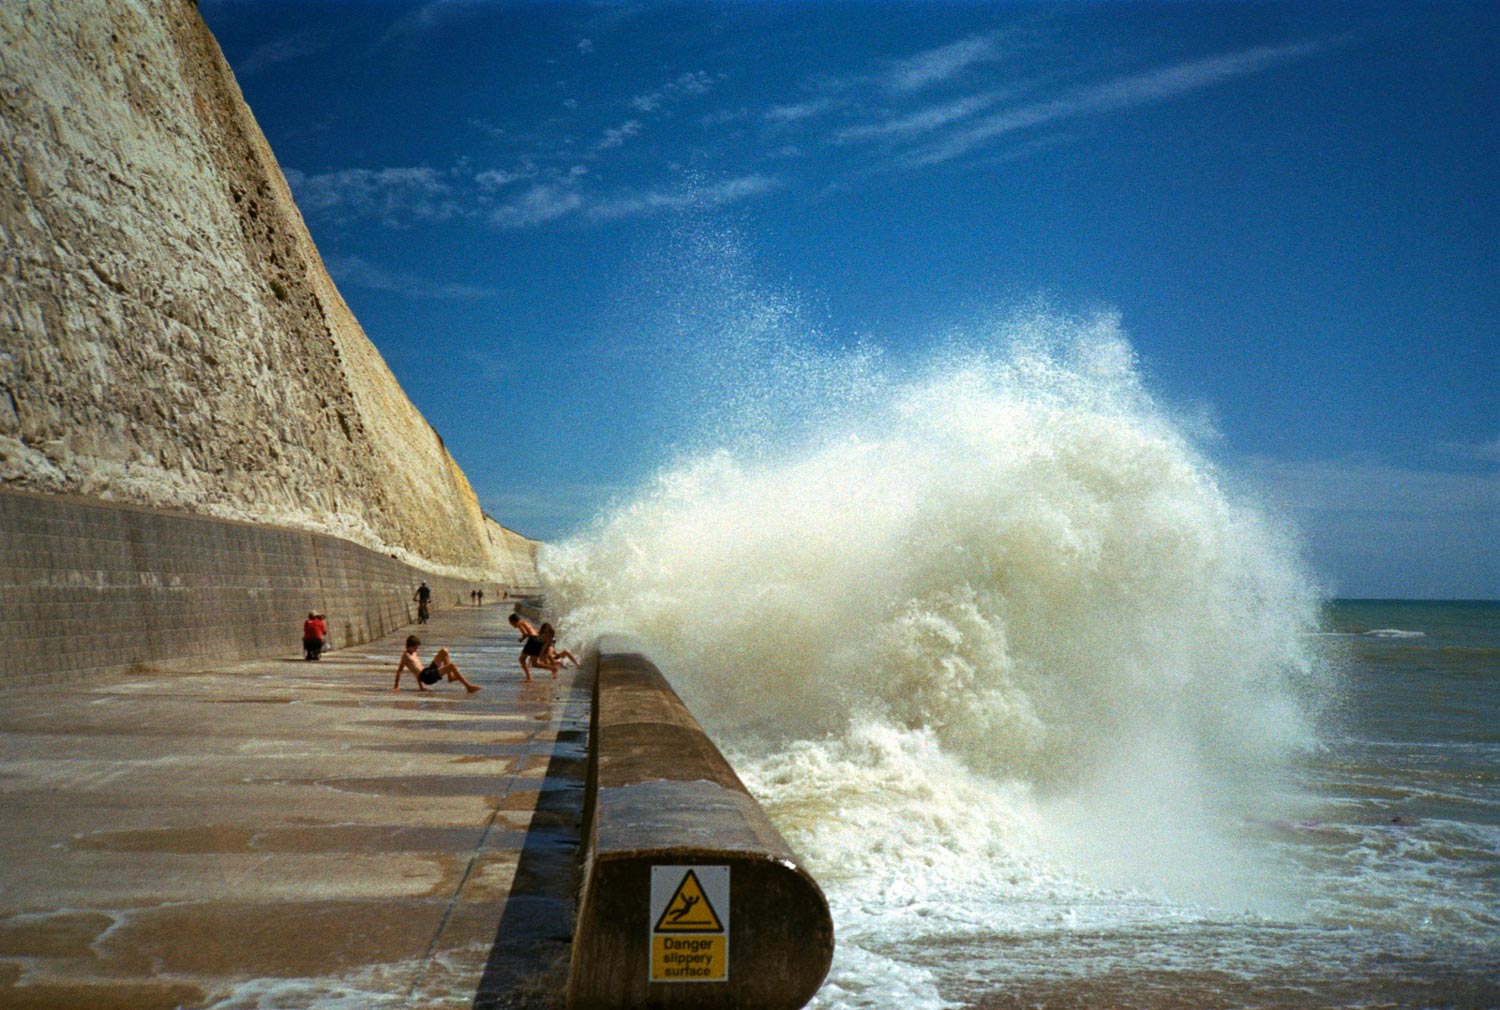 kids playing in the open waves, seafront, peacehaven promenade.